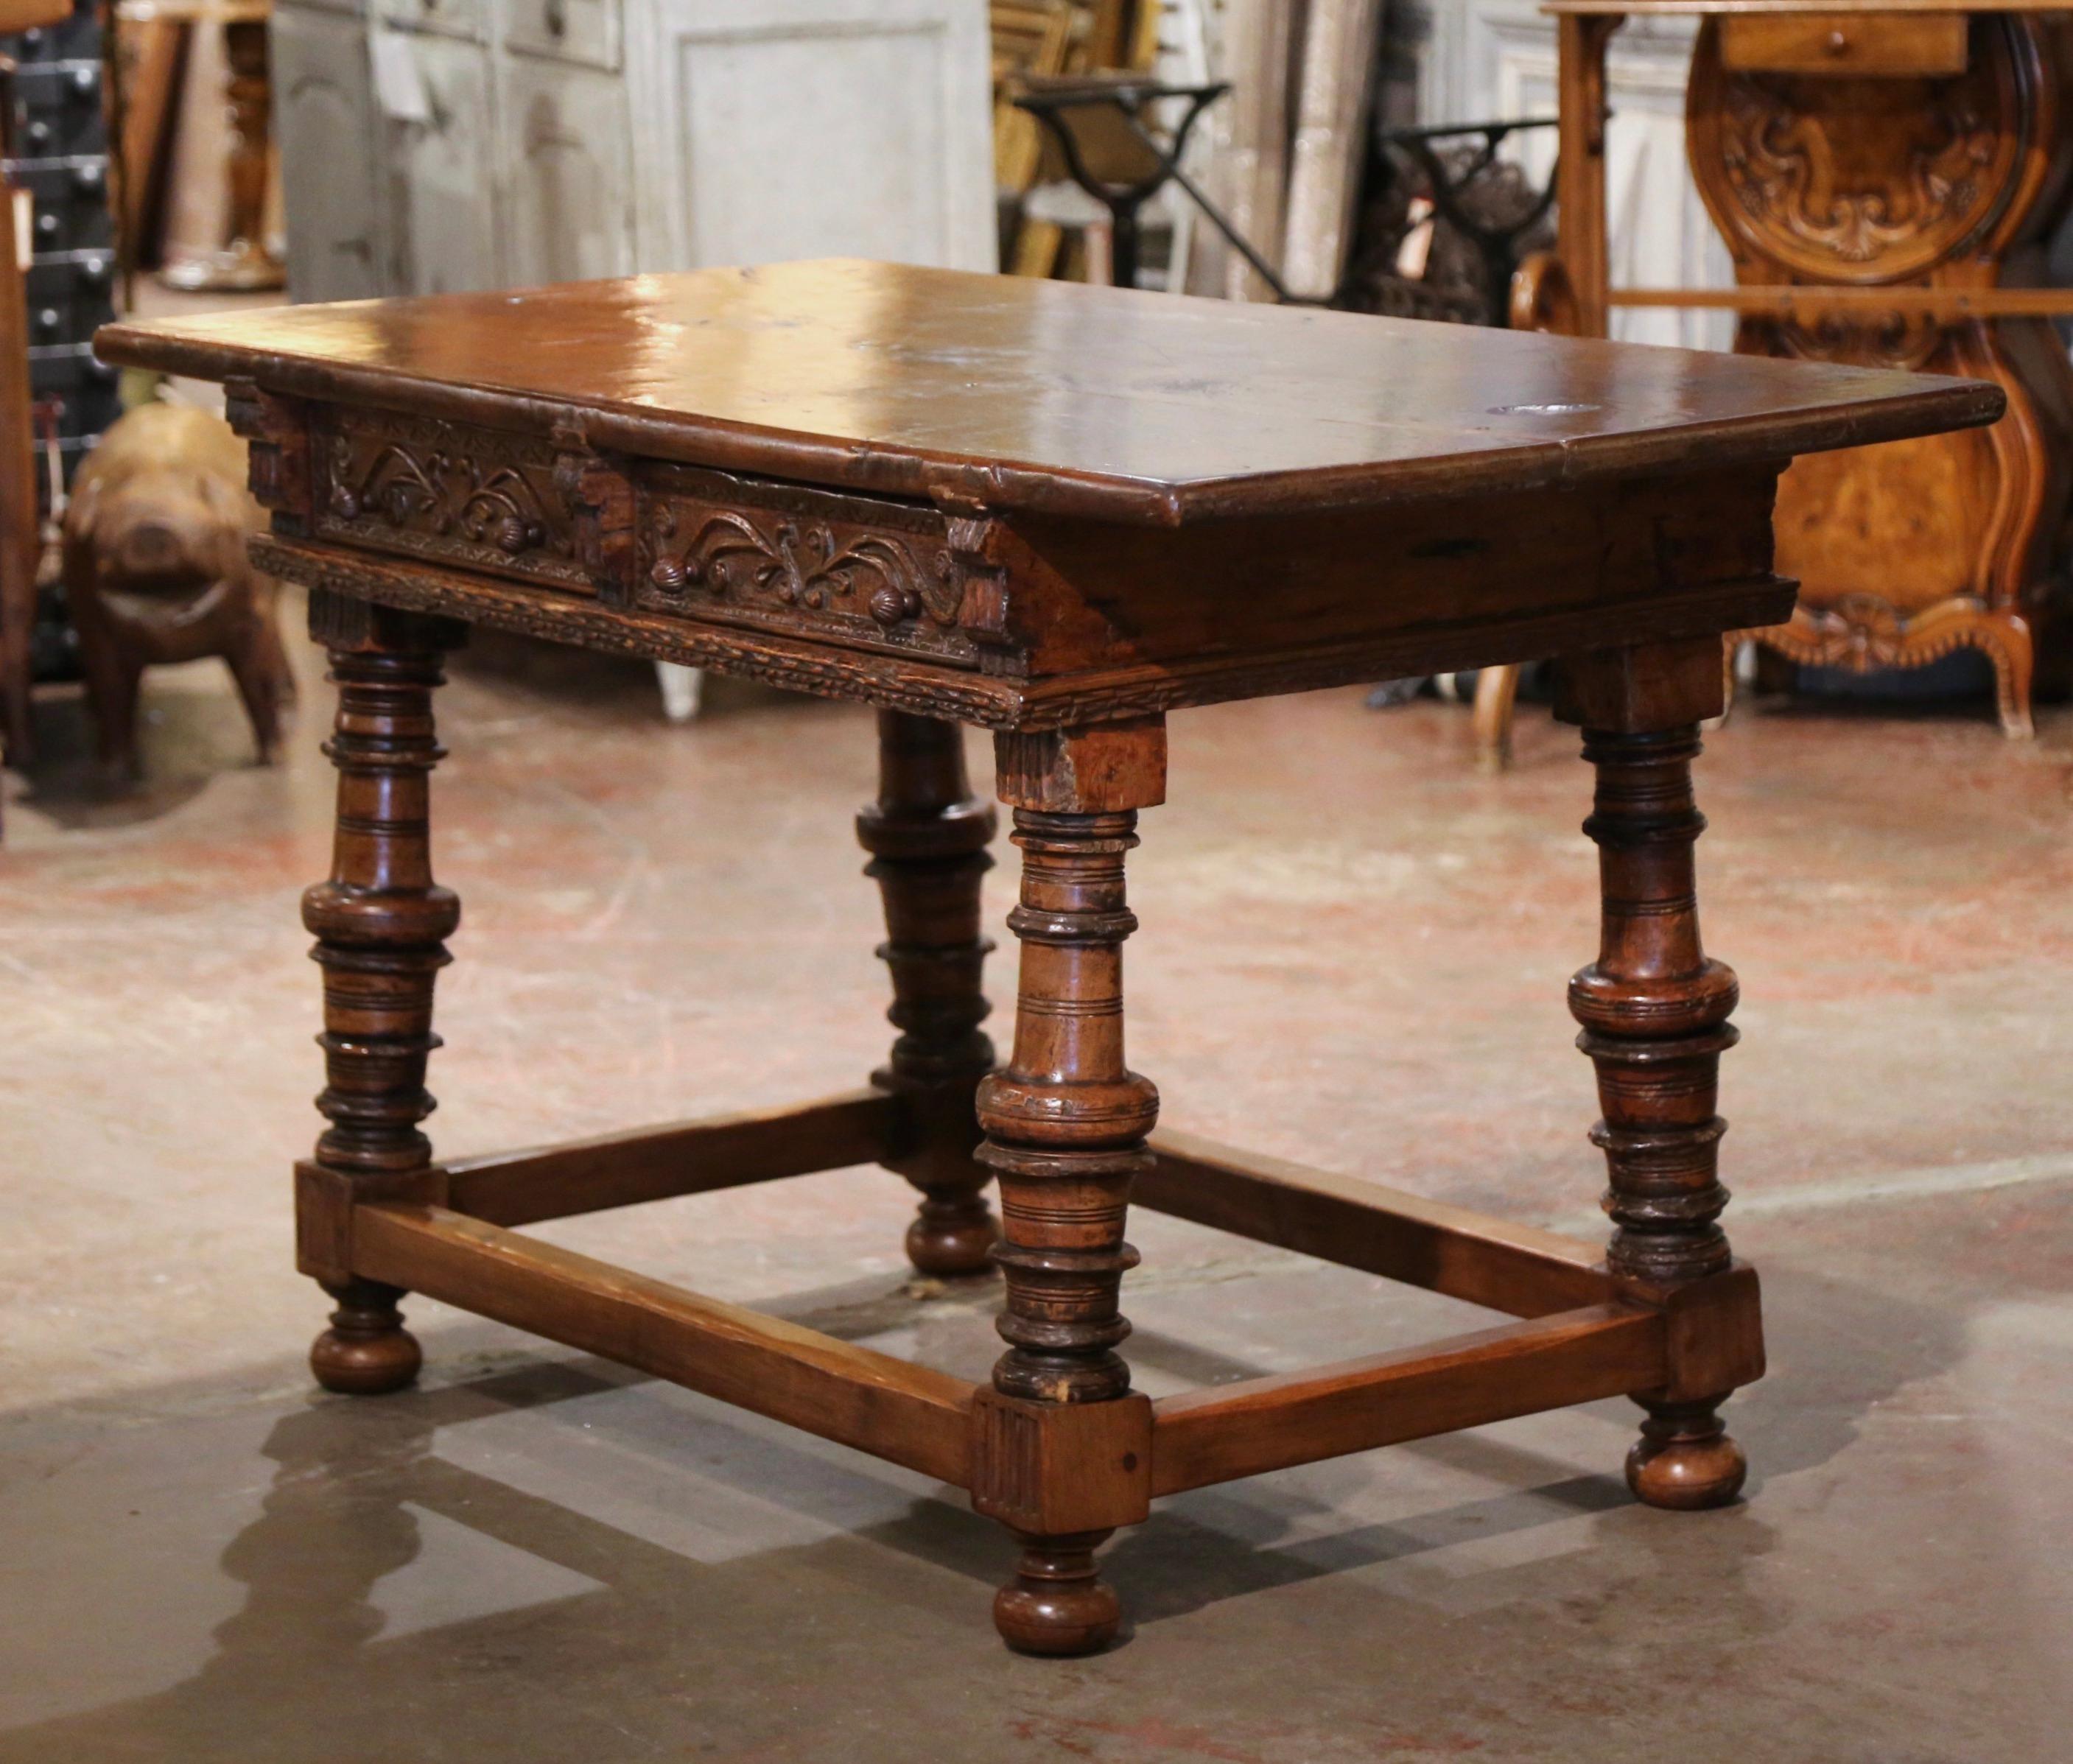 Crafted in Spain circa 1760, the antique writing table stands on thick carved turned legs ending with bun feet, and embellished with an elegant rectangular box stretcher at the base. The tall table features two hand carved drawers across the front